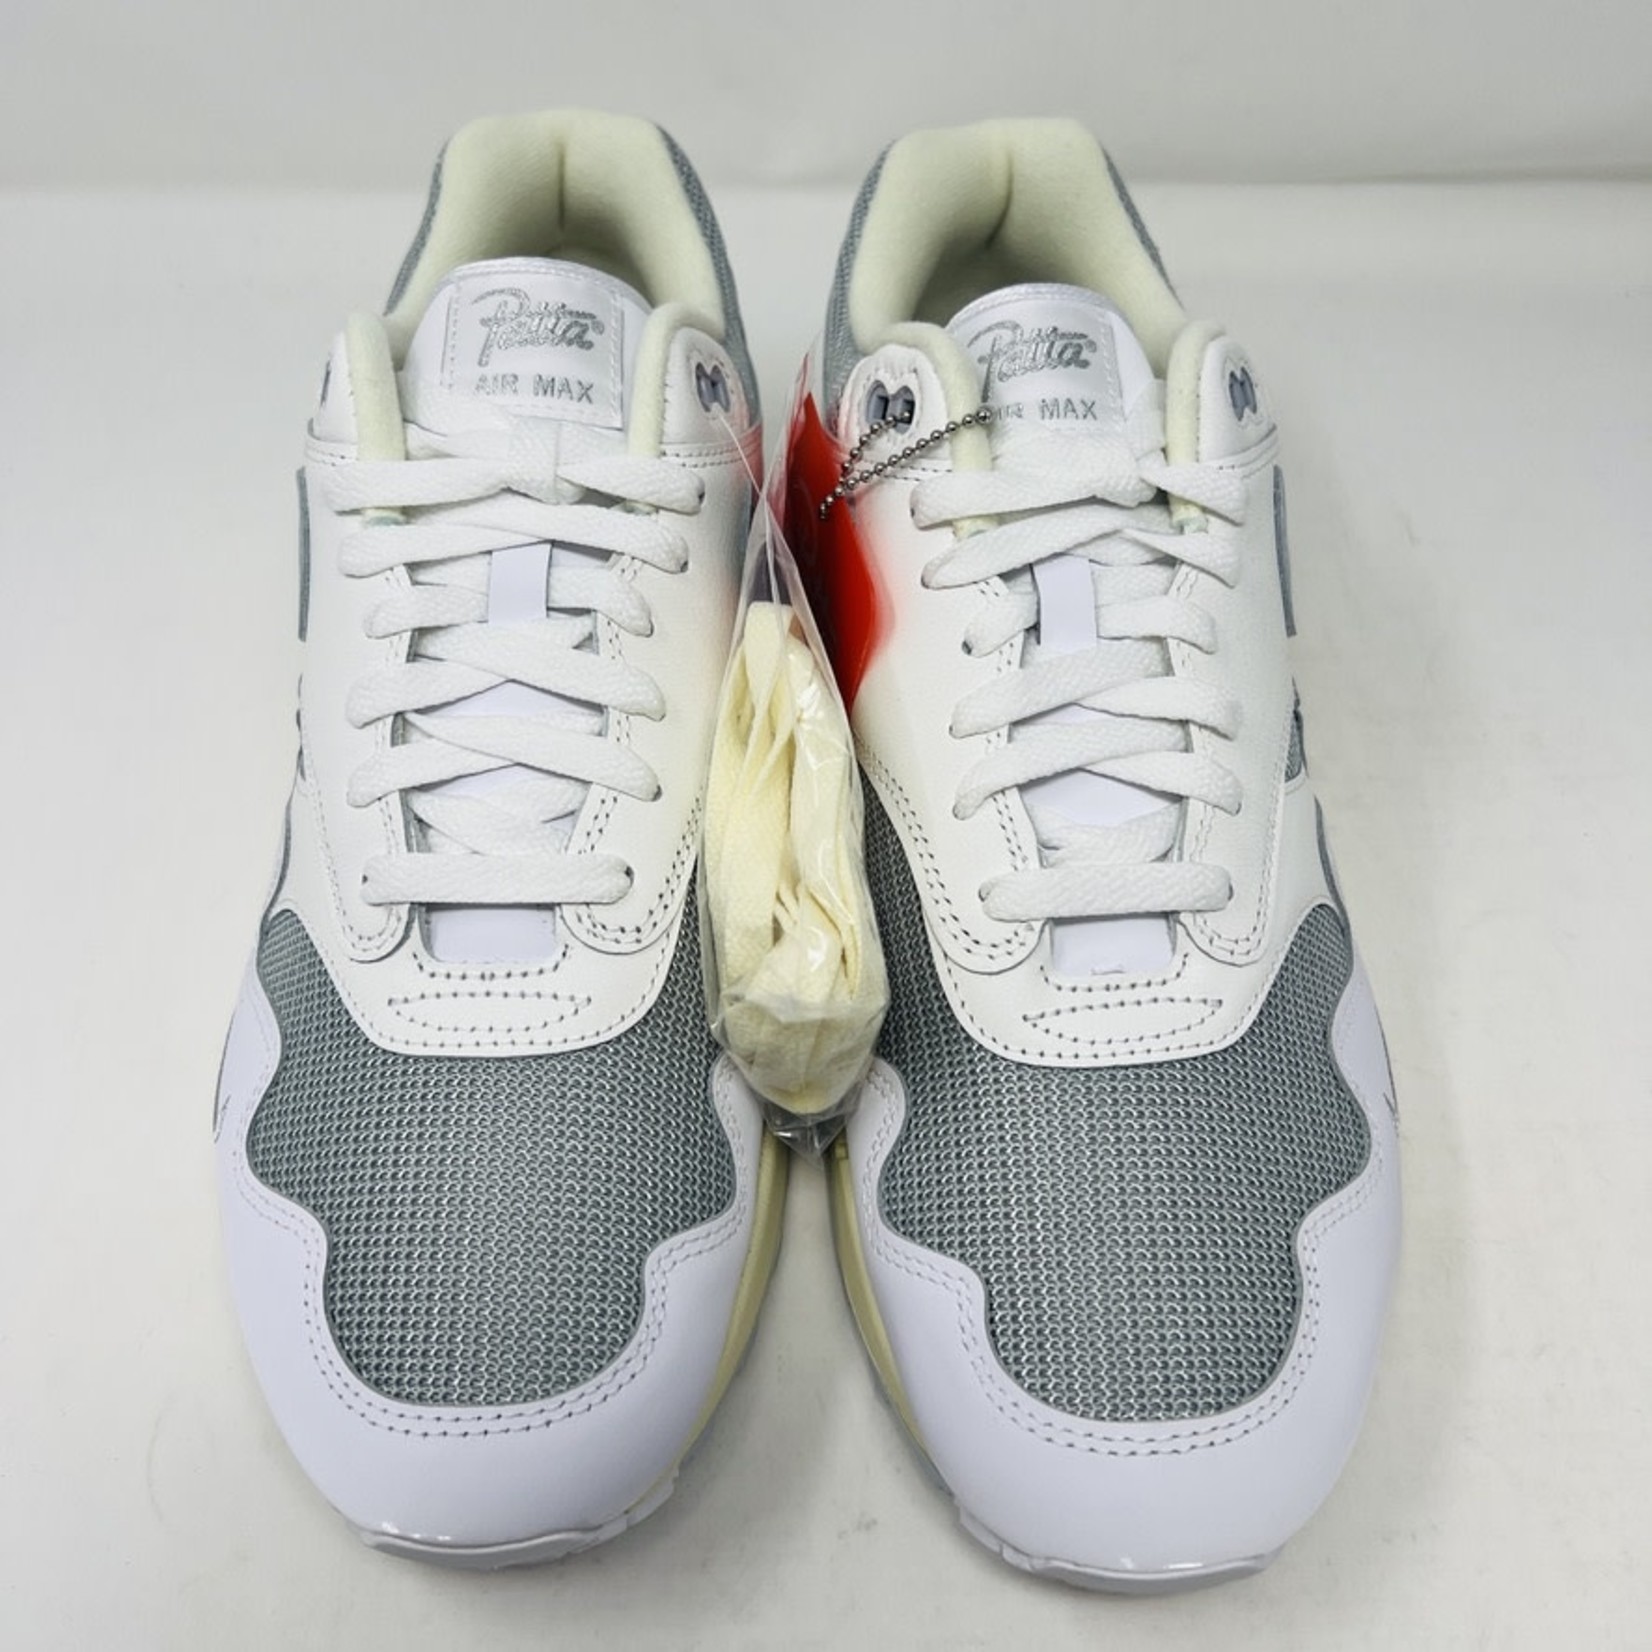 Nike Air Max 1 Patta Waves White - Holy Ground Sneaker Shop - Buy, Sell ...